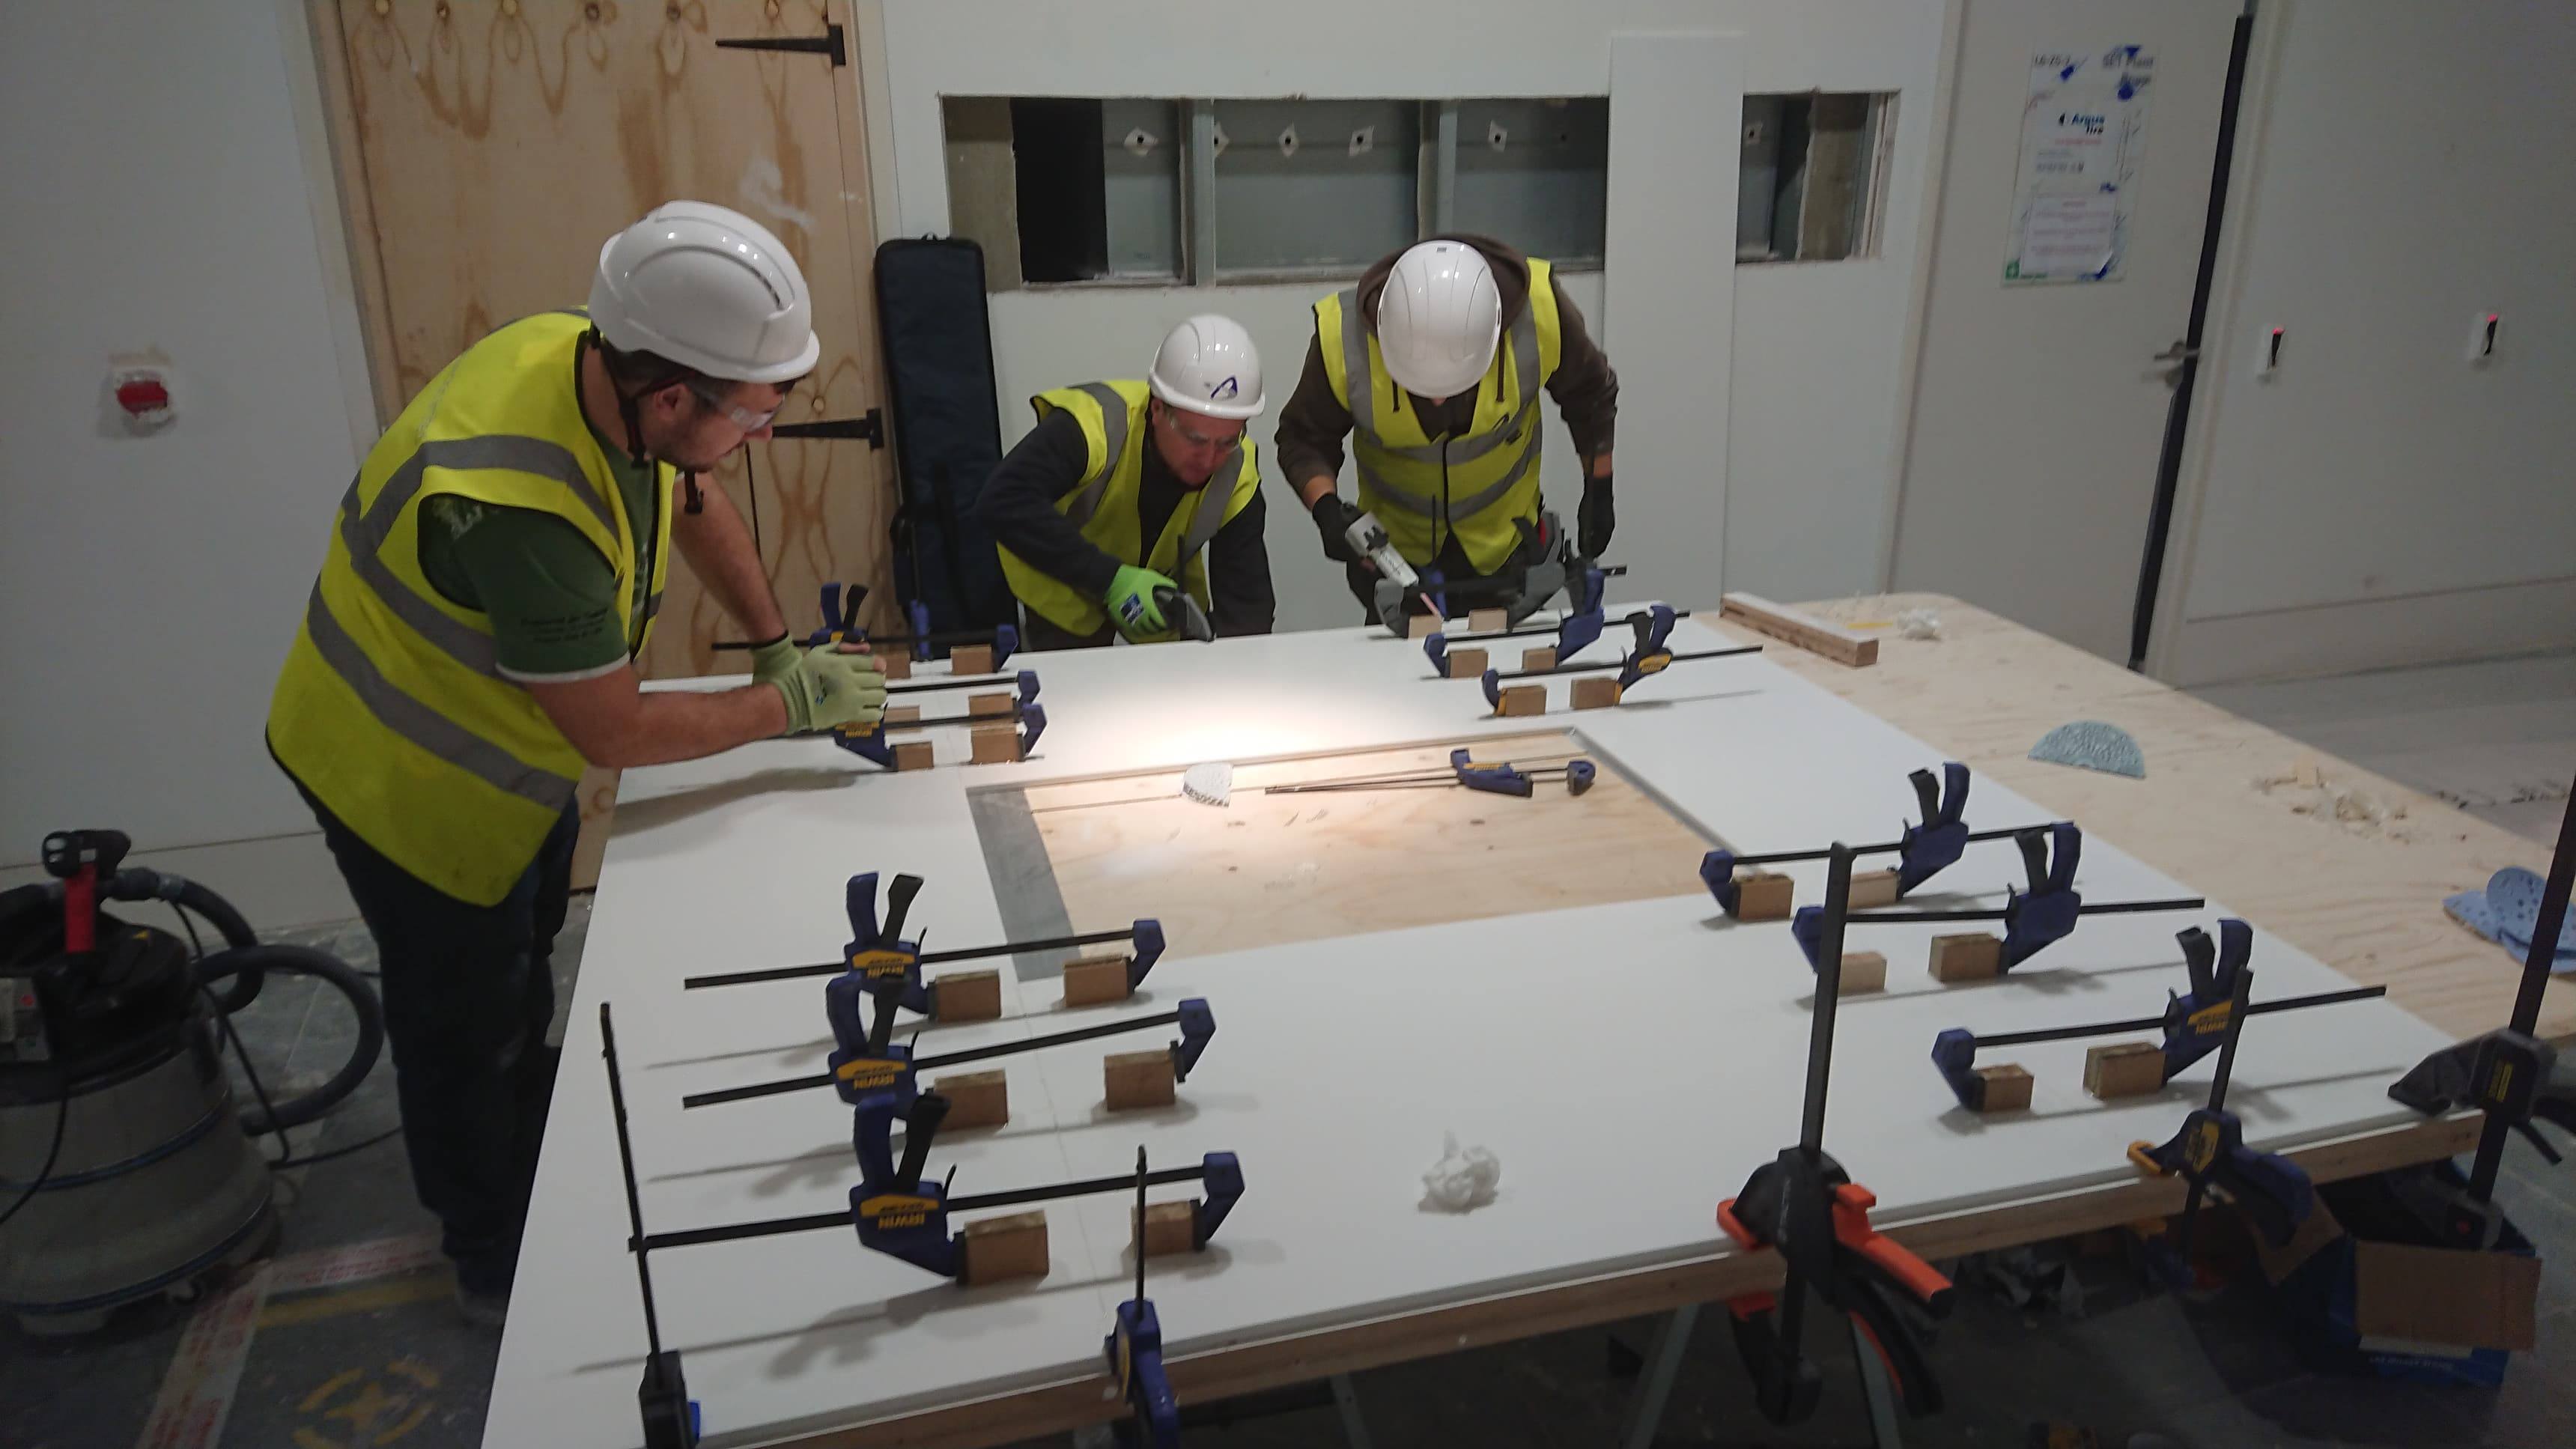 Plumtree Court, Shoe Lane, Central London, EC4 - Skilled Corian fitters 2